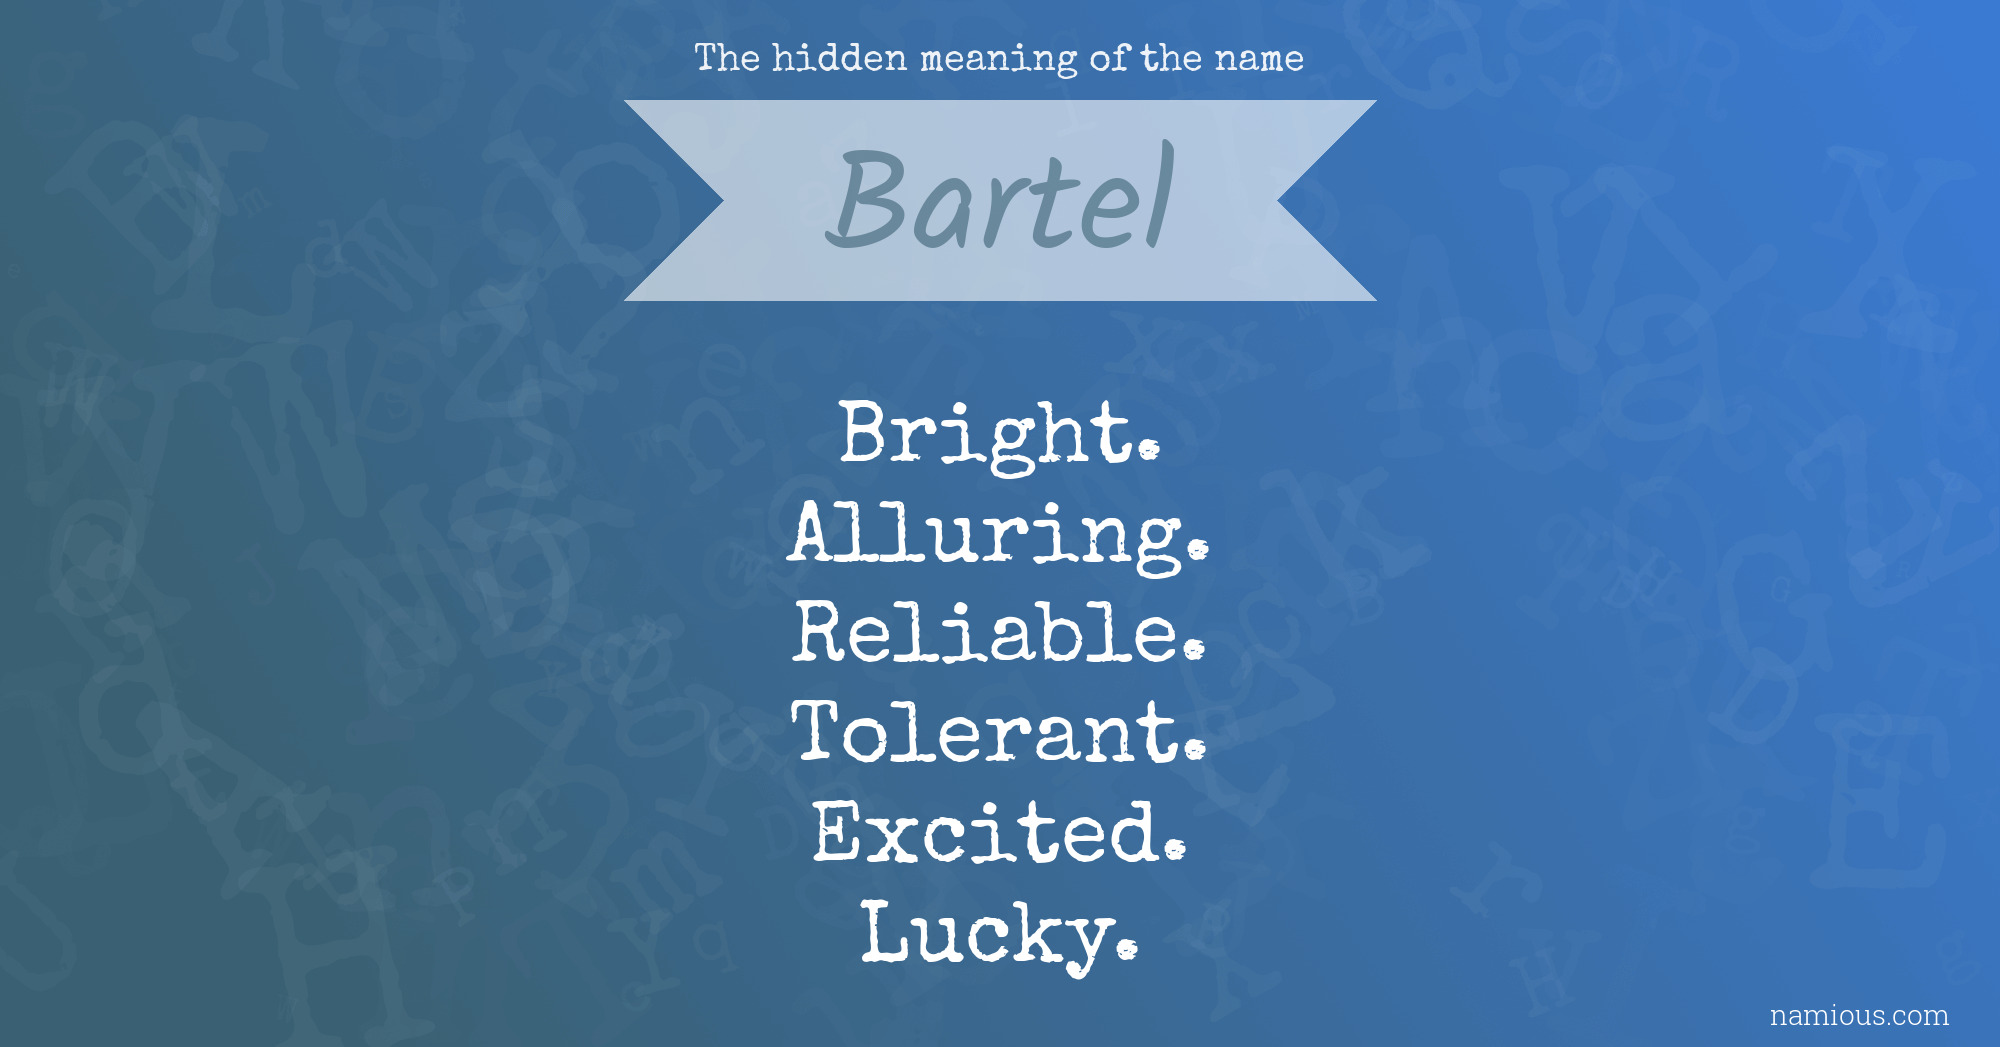 The hidden meaning of the name Bartel